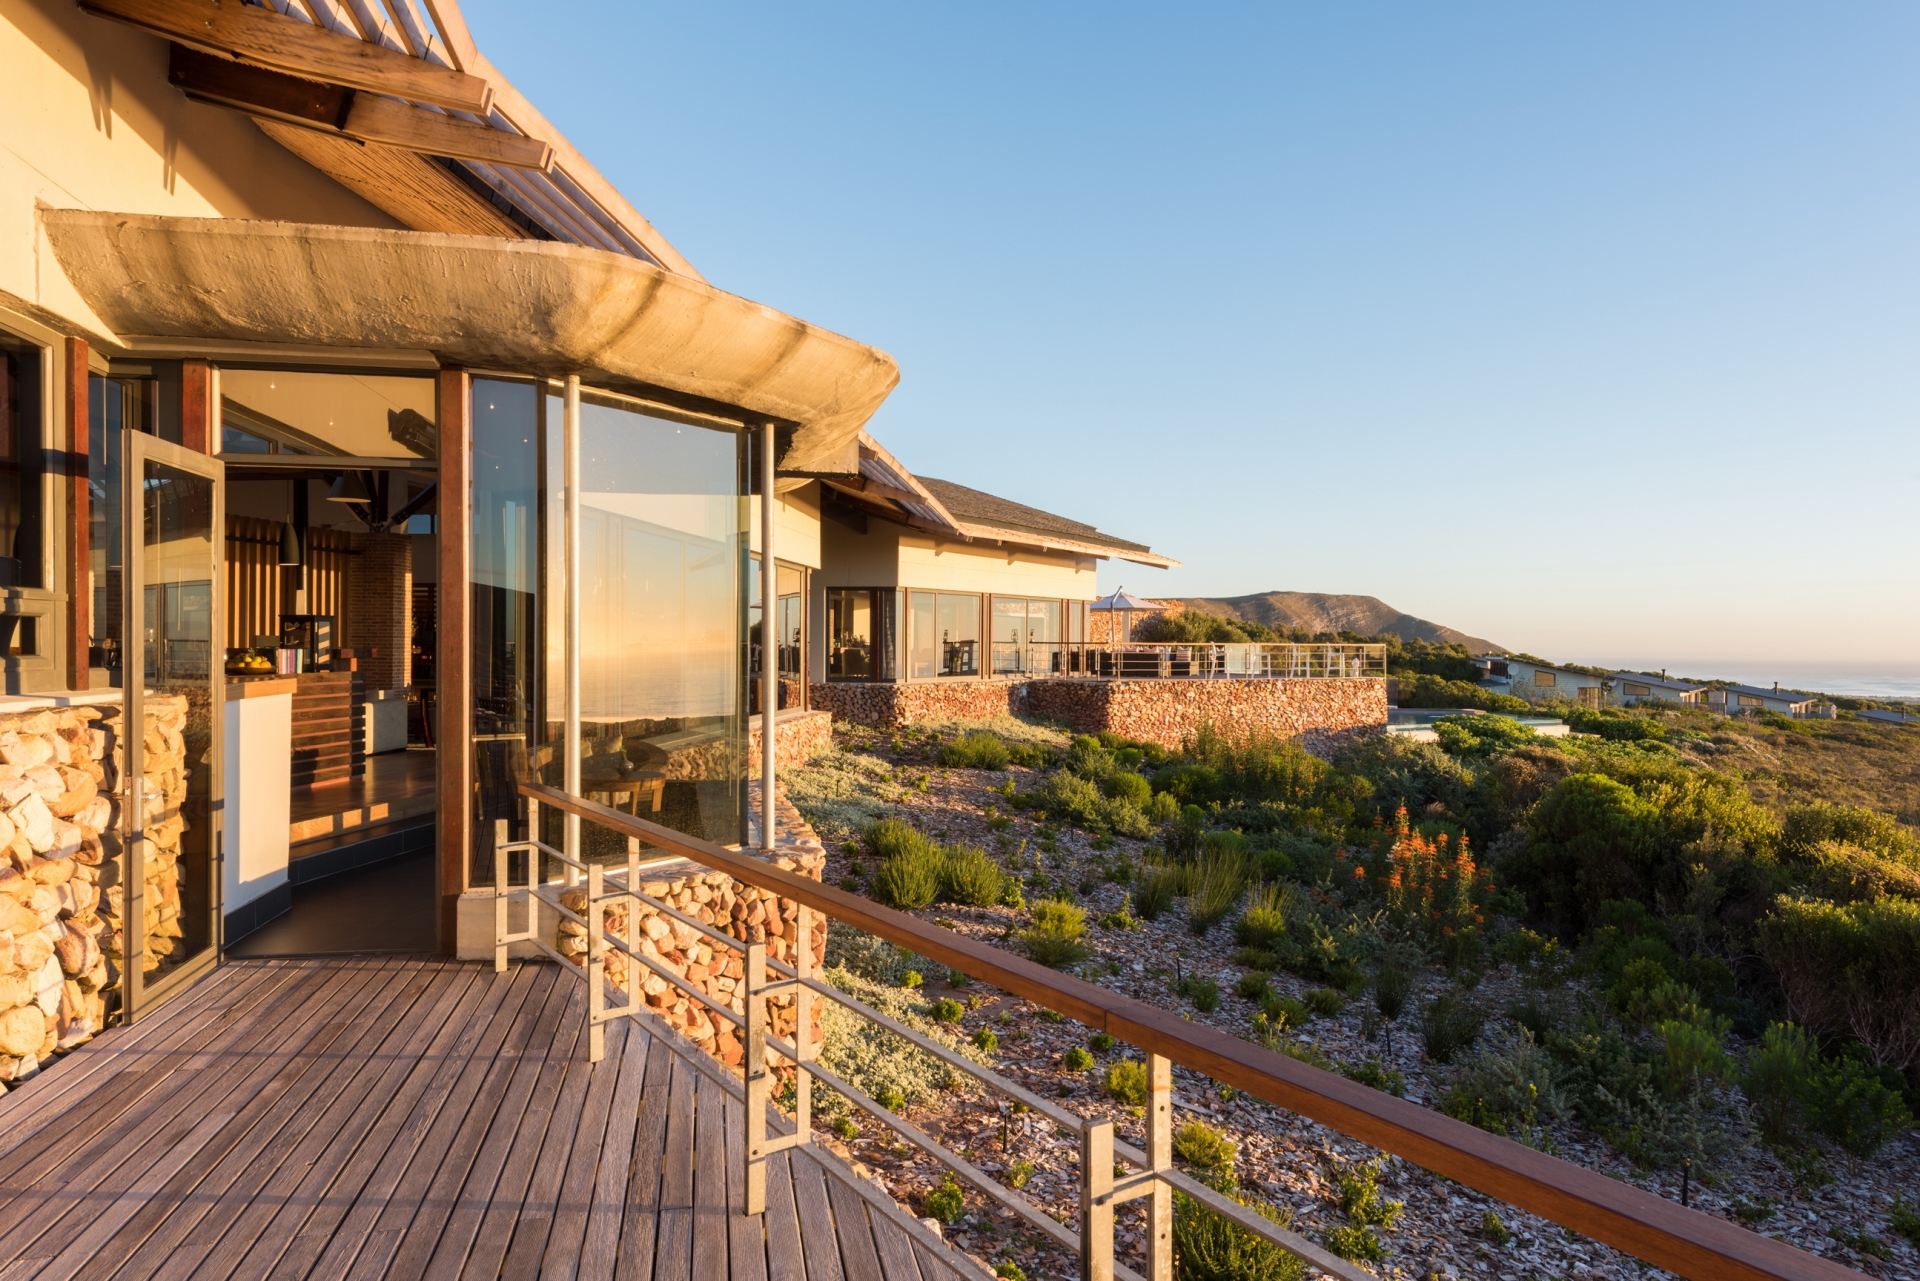 Forest Lodge - Grootbos Private Nature Reserve